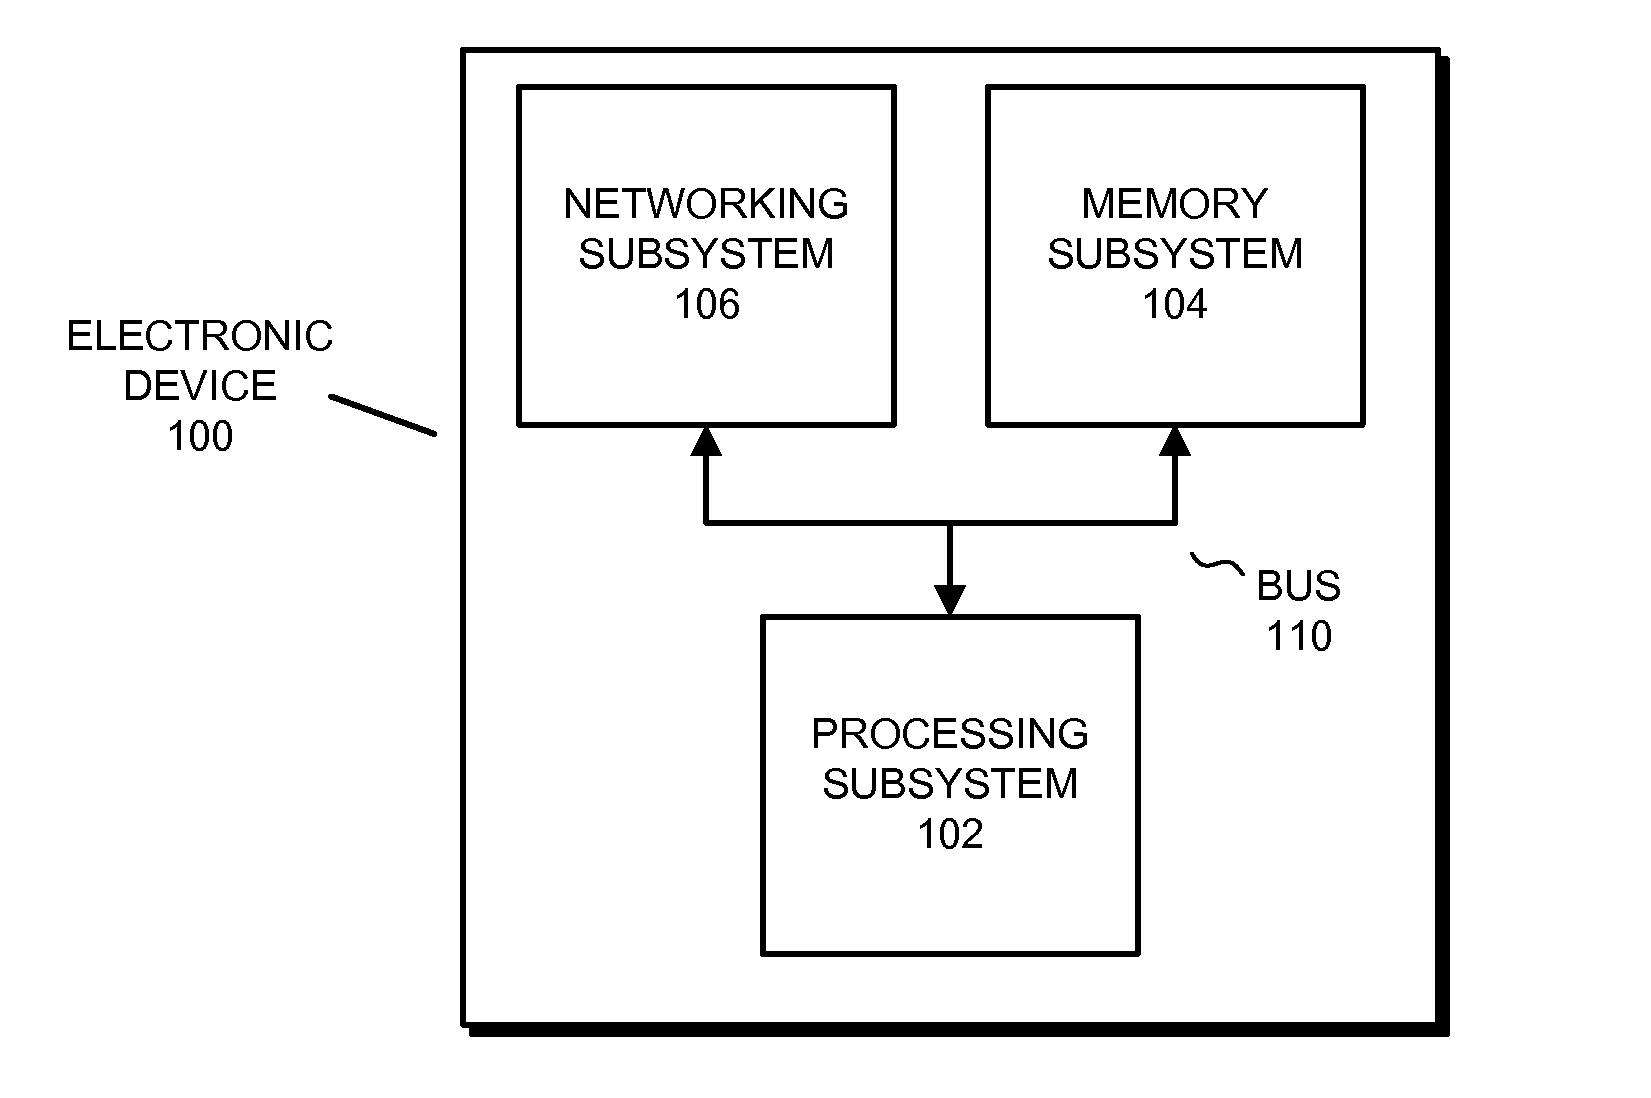 Audio transfer using the bluetooth low energy standard